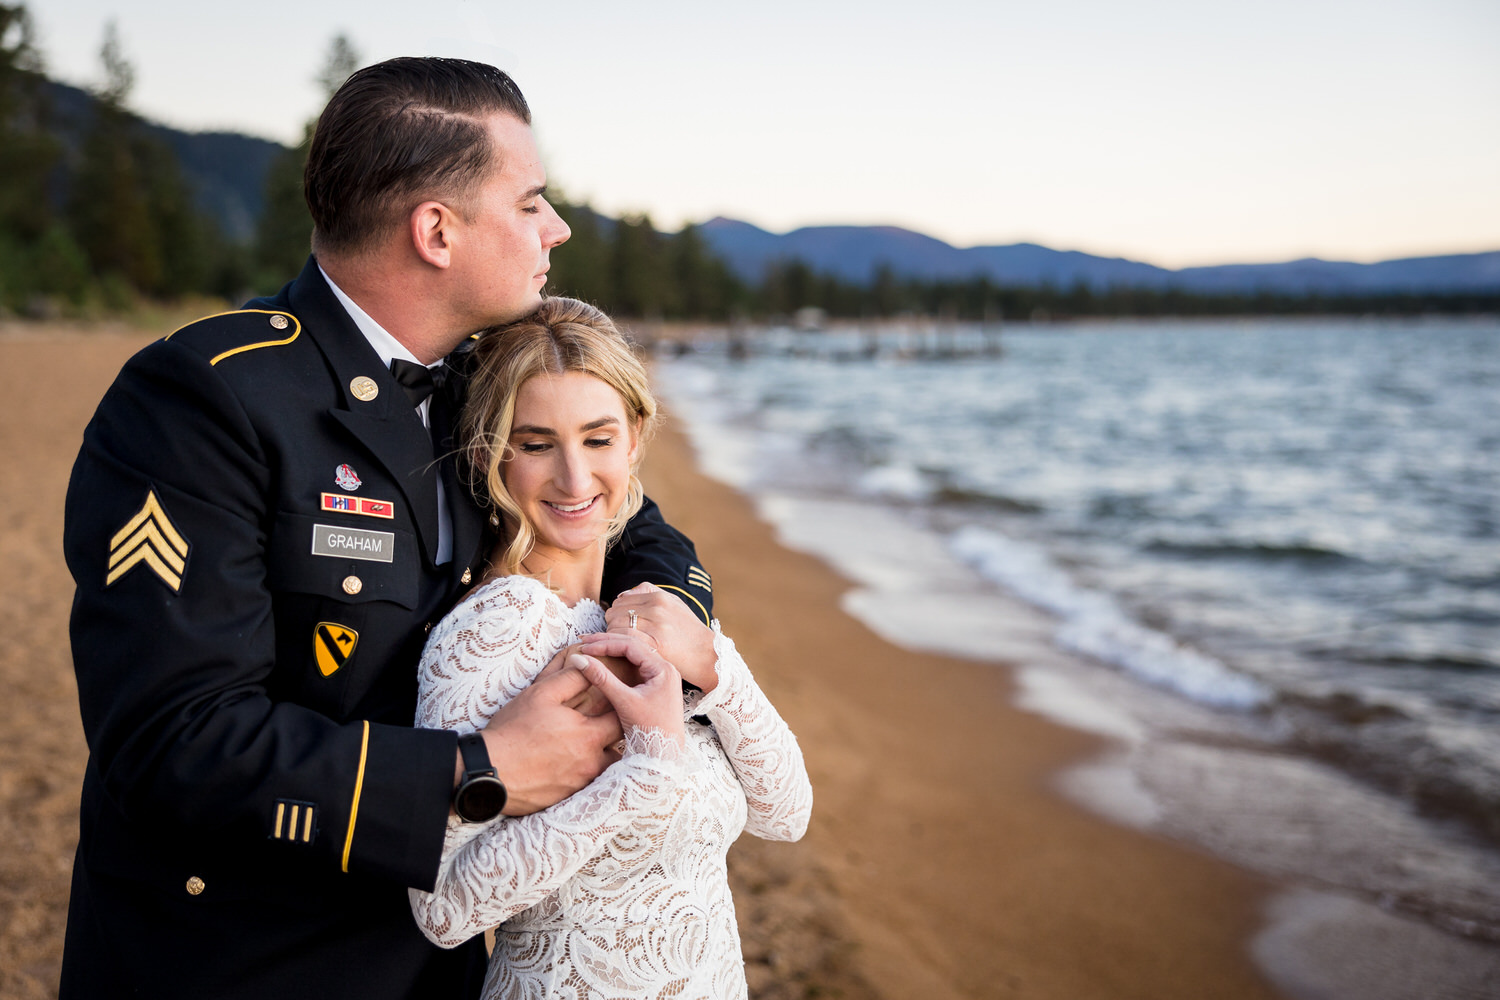 Sunset lakeside portrait of a bride and groom at a South Lake Tahoe military wedding.